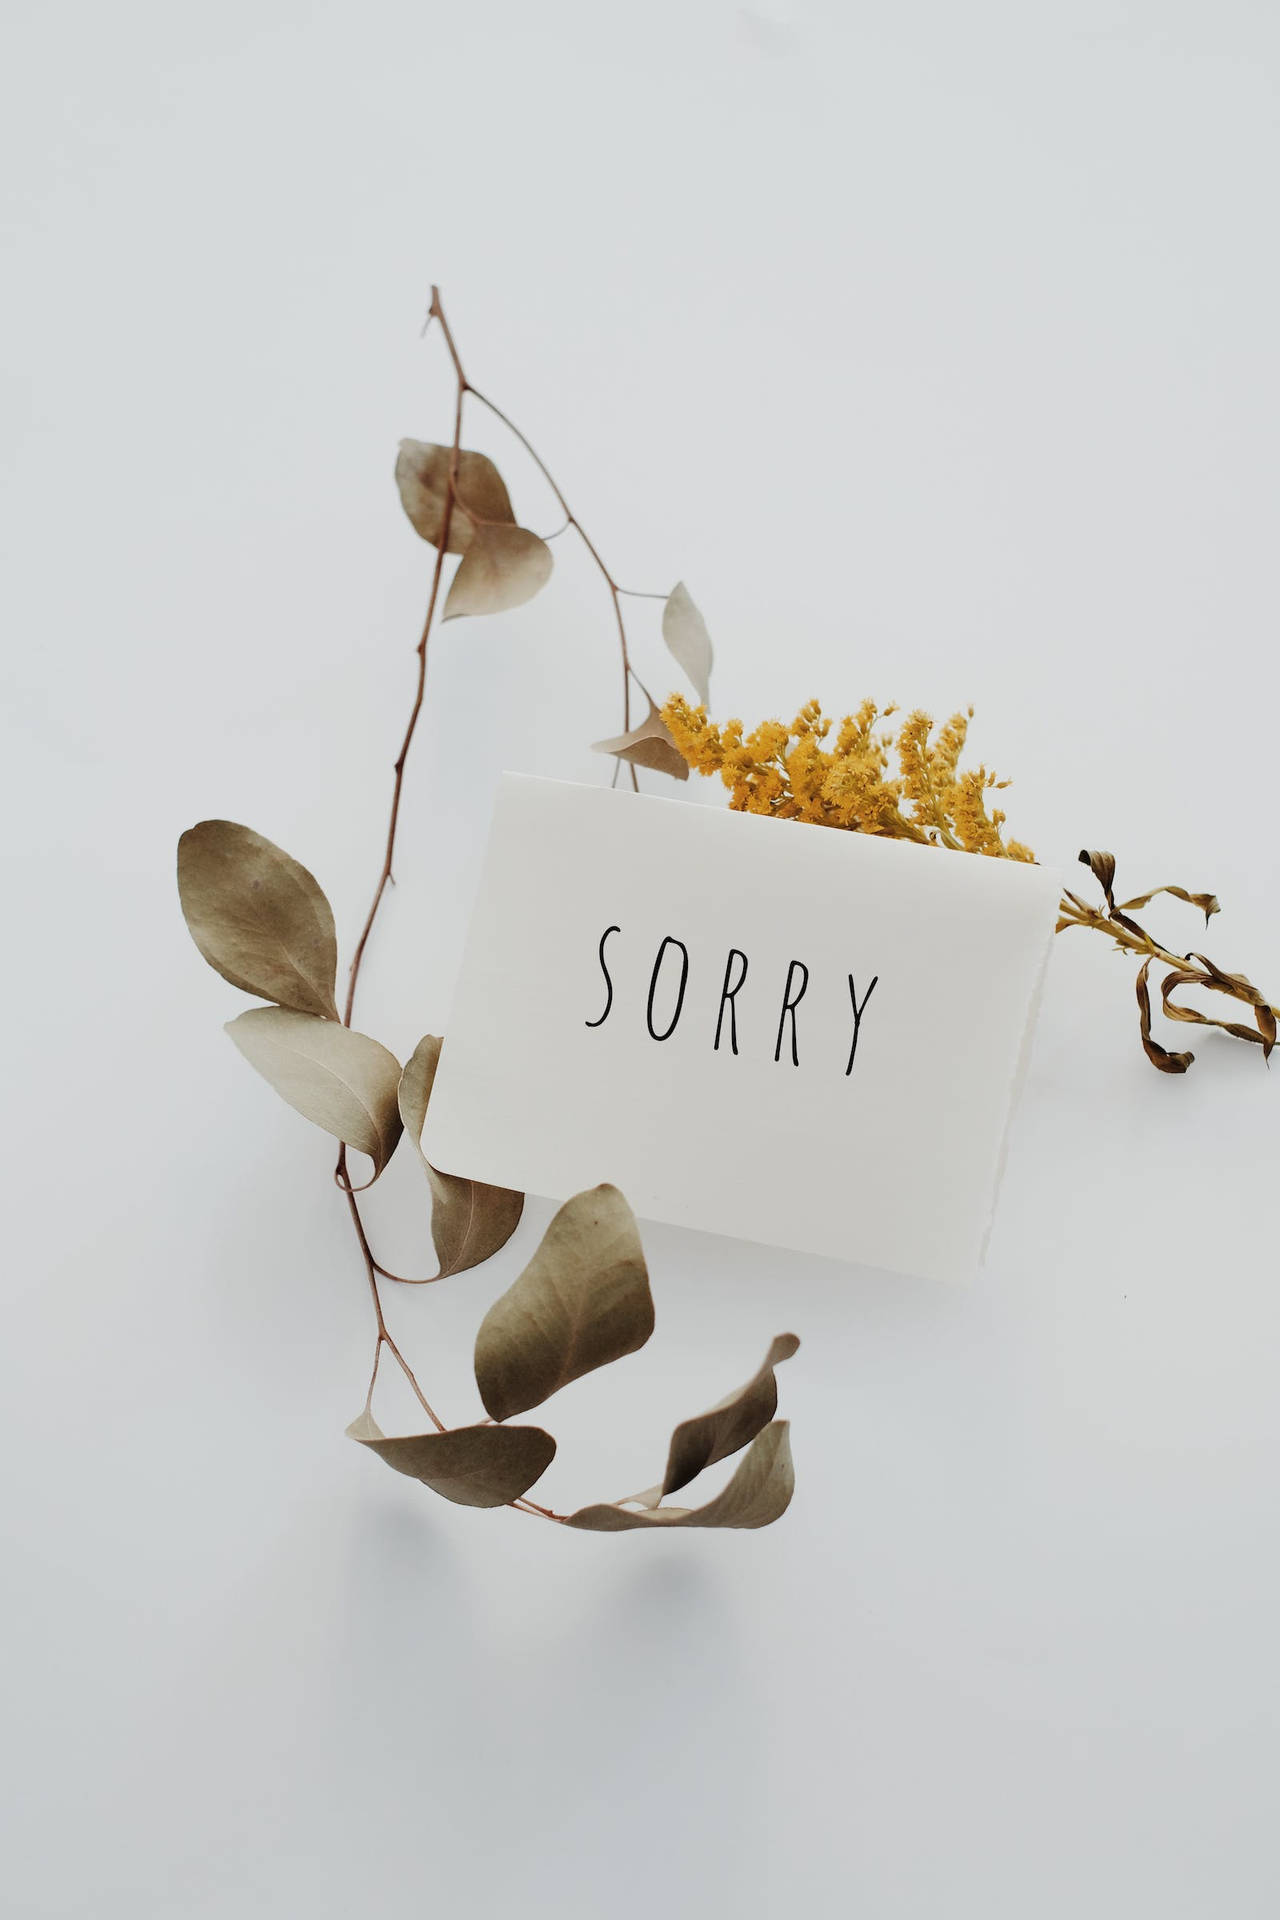 Im Sorry Postcard And Flowers Wallpaper